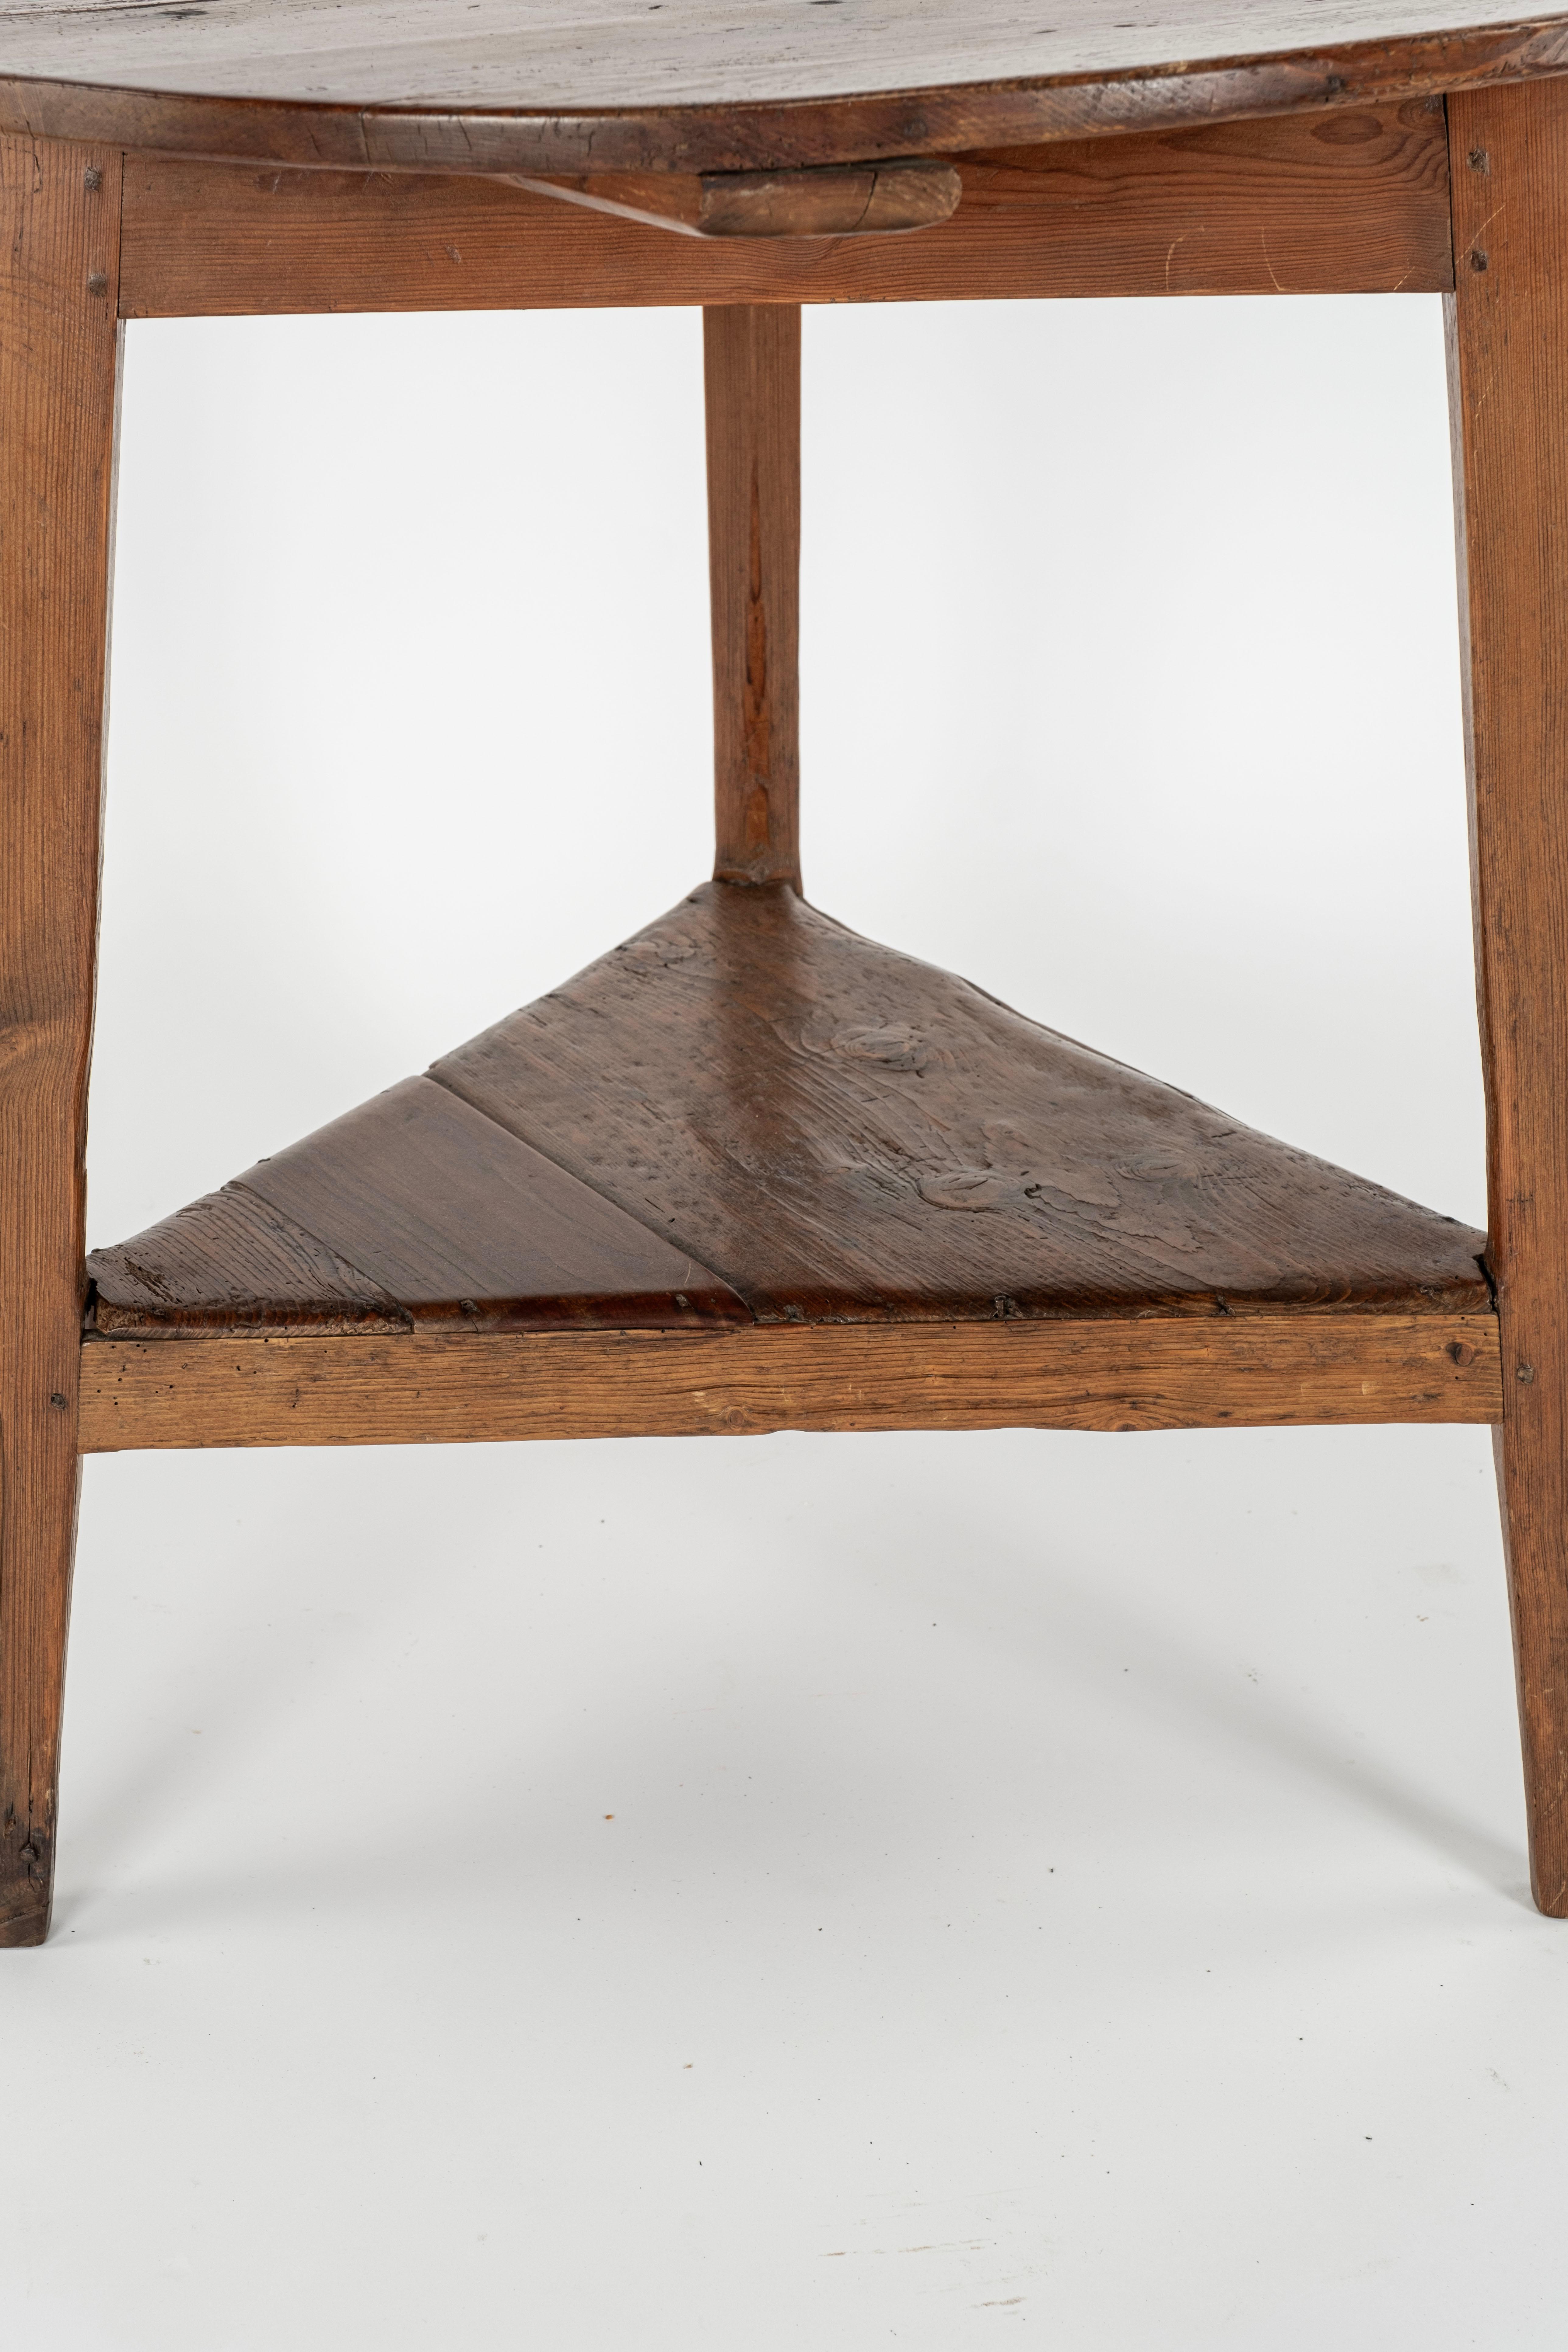 19th Century Cricket Table with shelf underneath For Sale 2